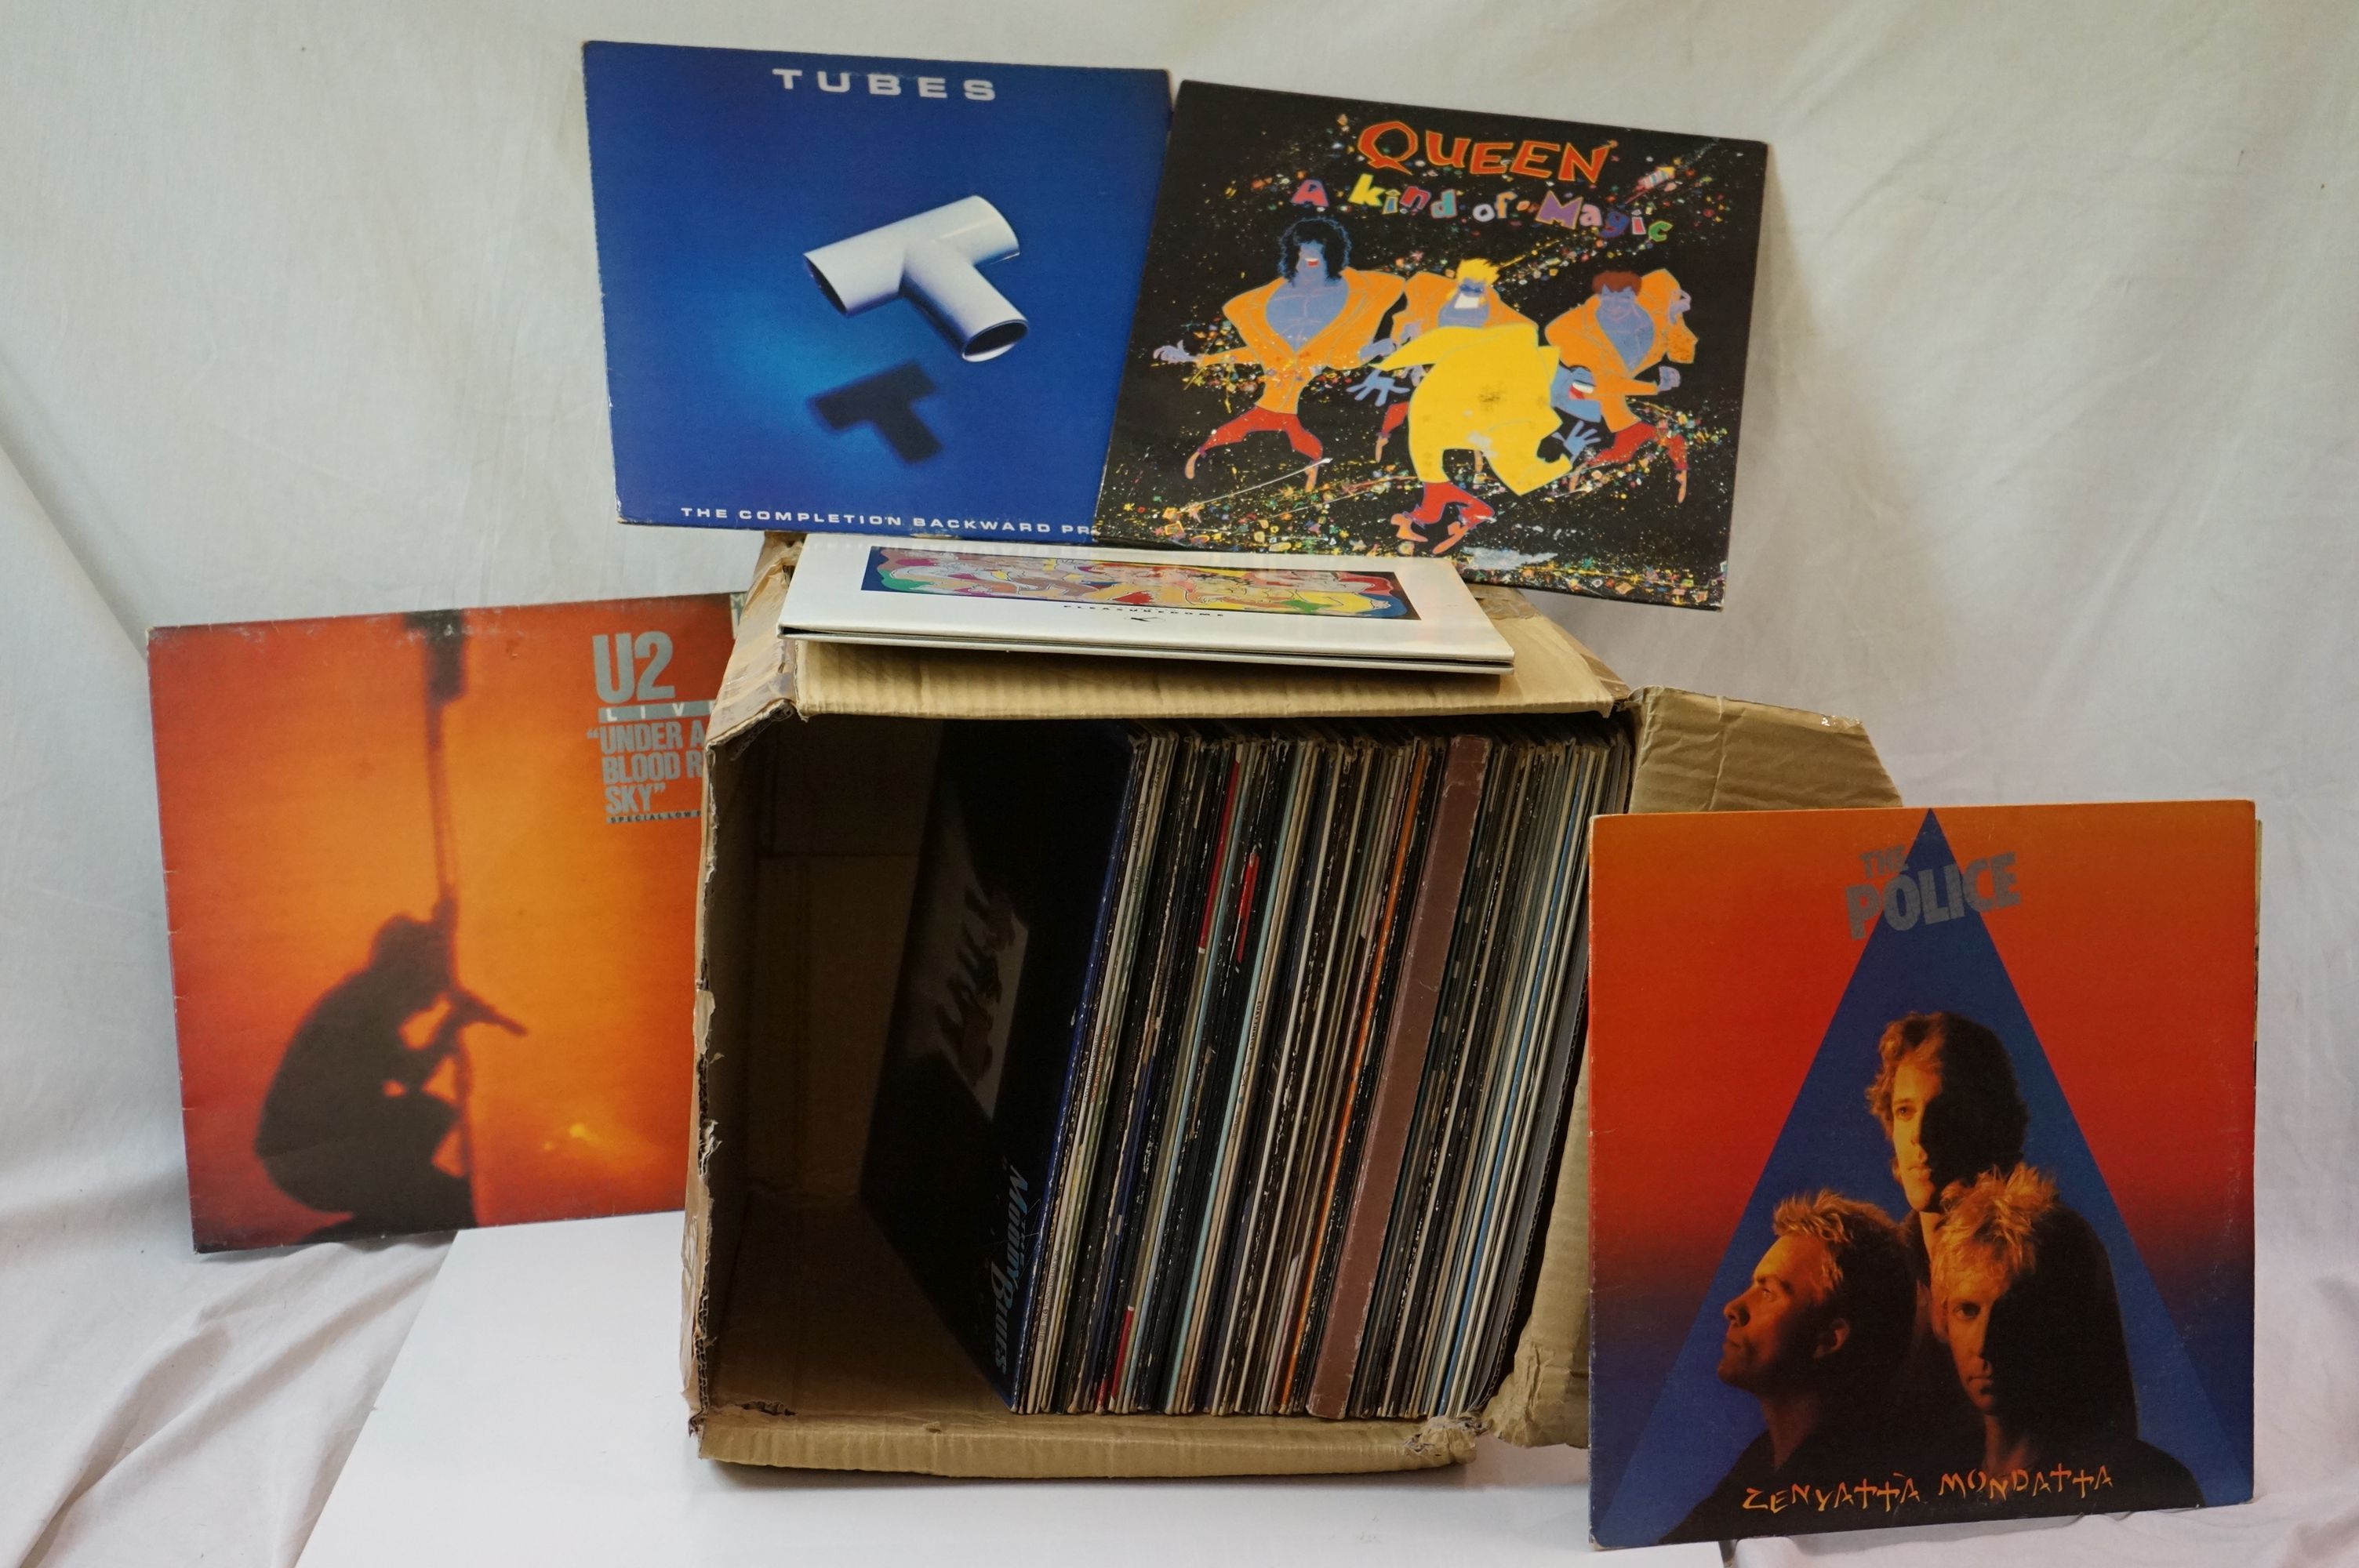 Vinyl - Rock & Pop collection of approx 60 LP's & 12" singles including The Police, U2, Tubes,